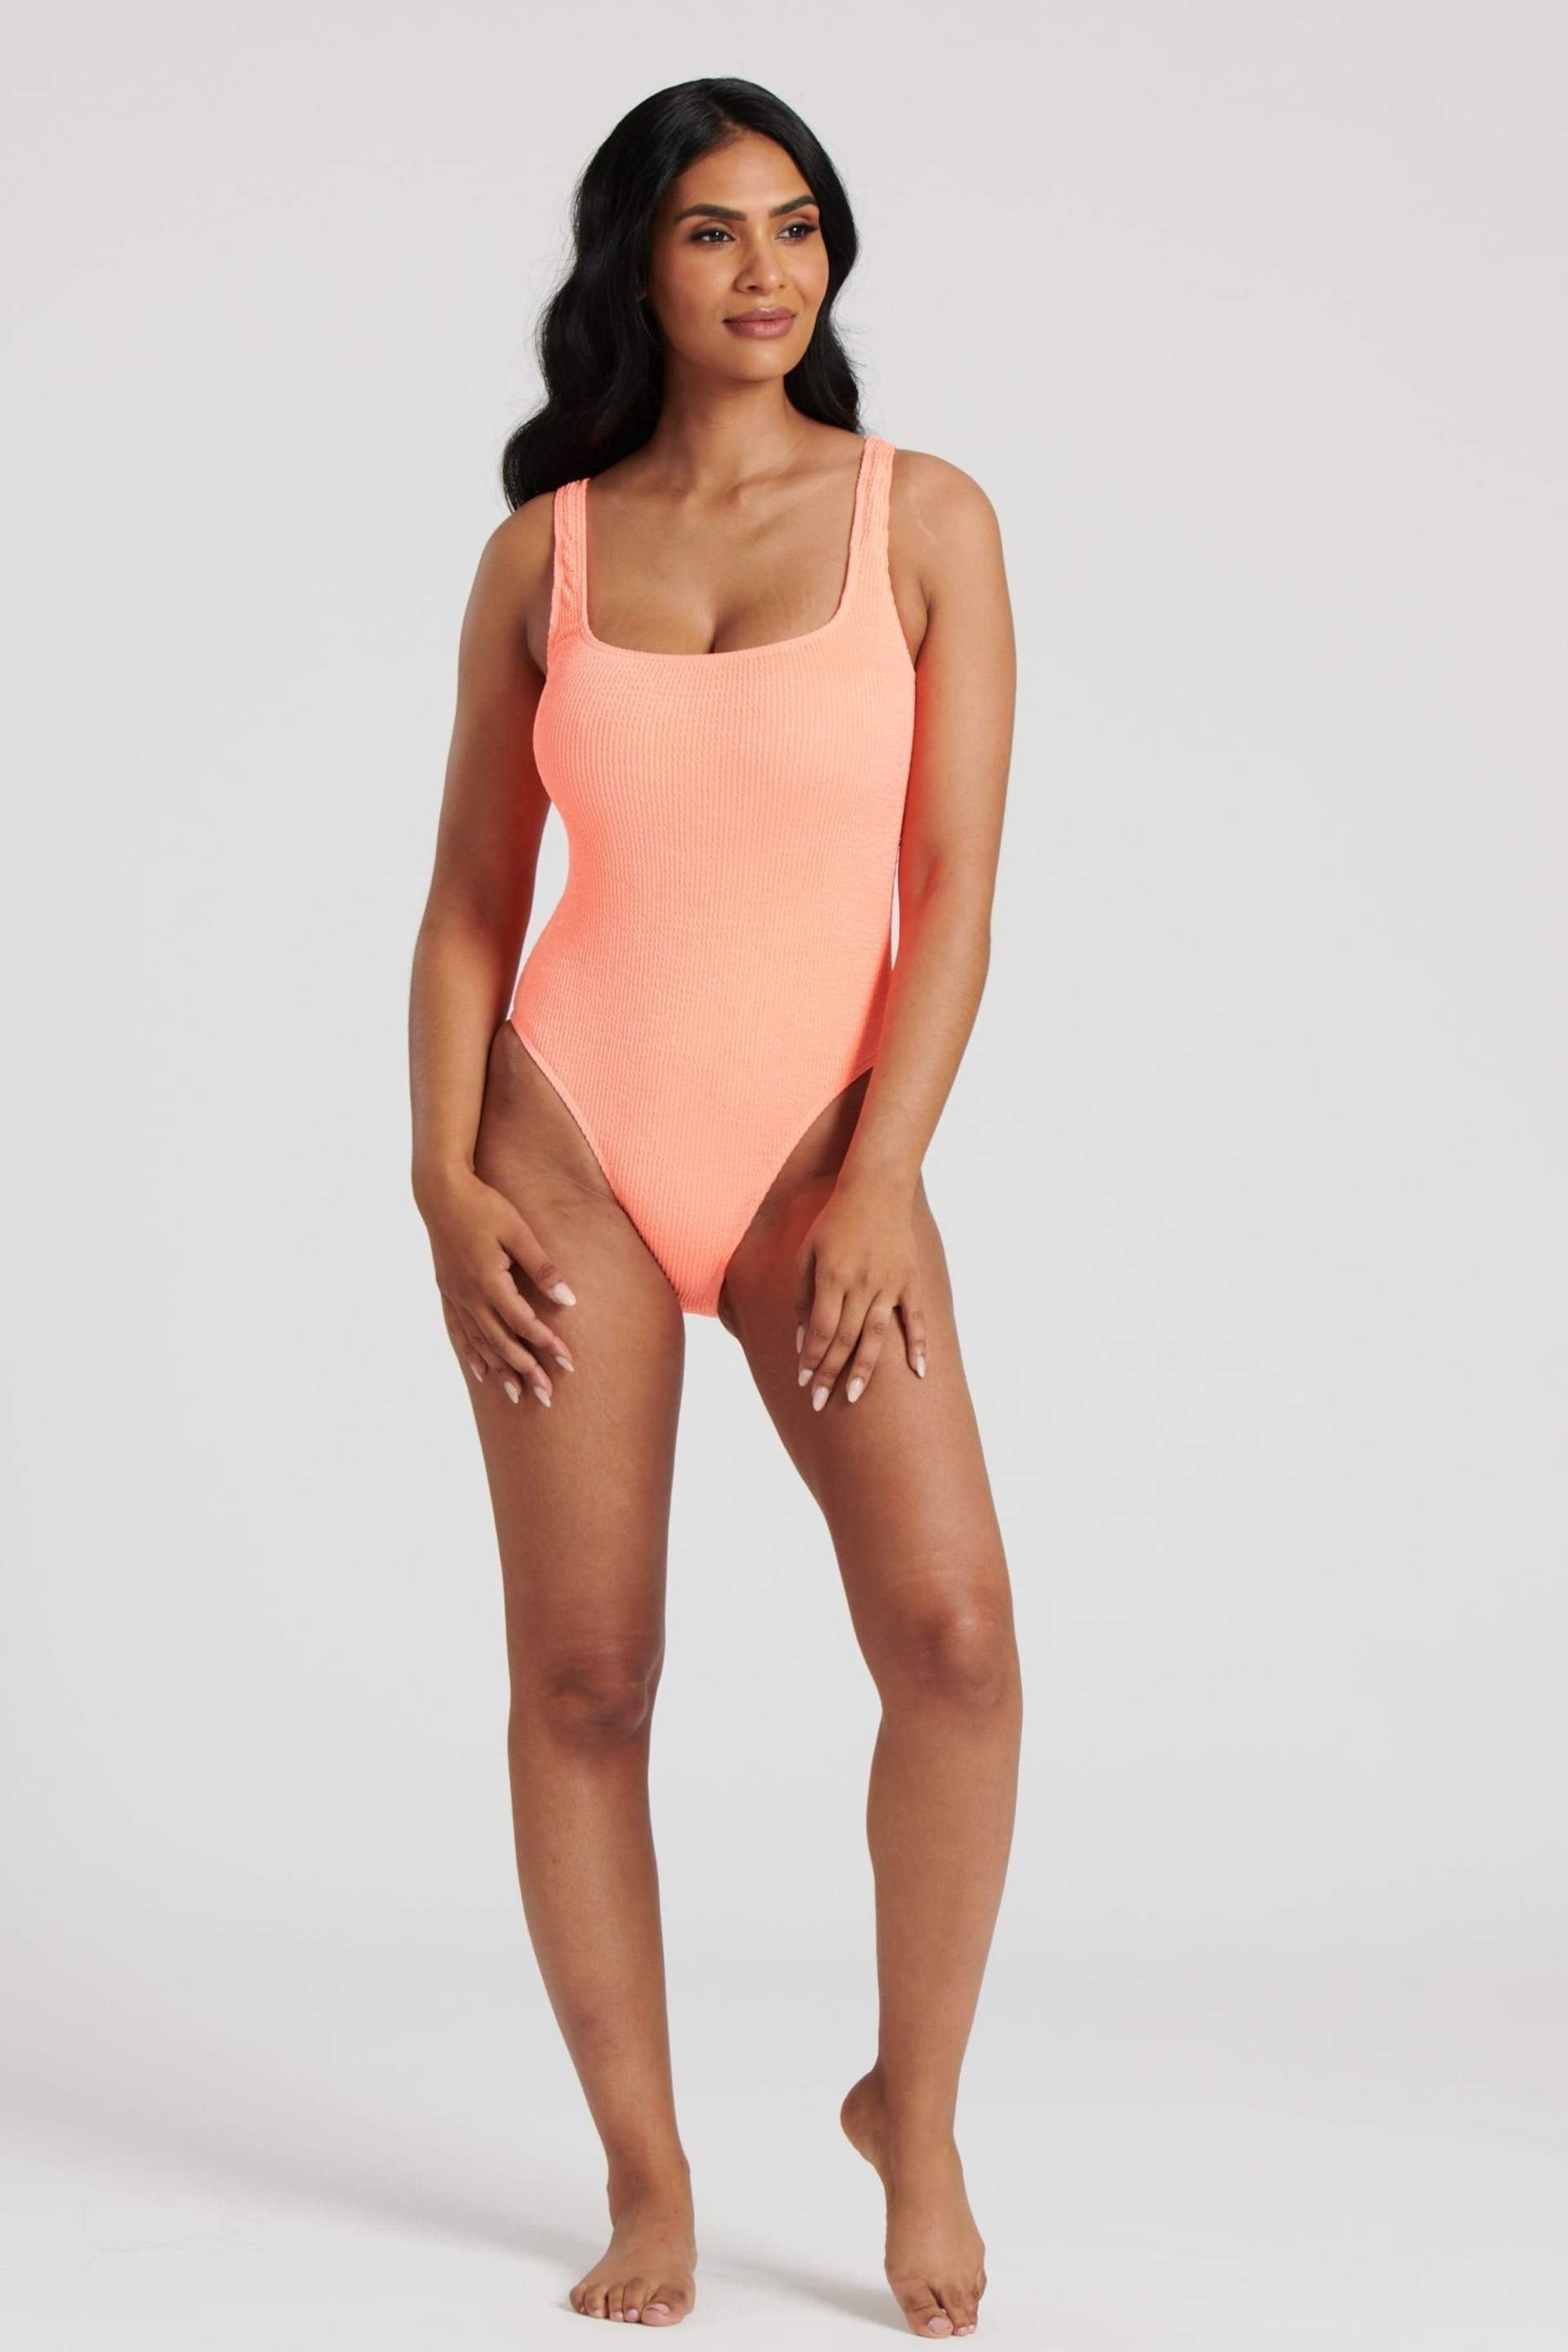 South Beach Pink Crinkle Textured Scoop Neck Swimsuit - Image 5 of 6